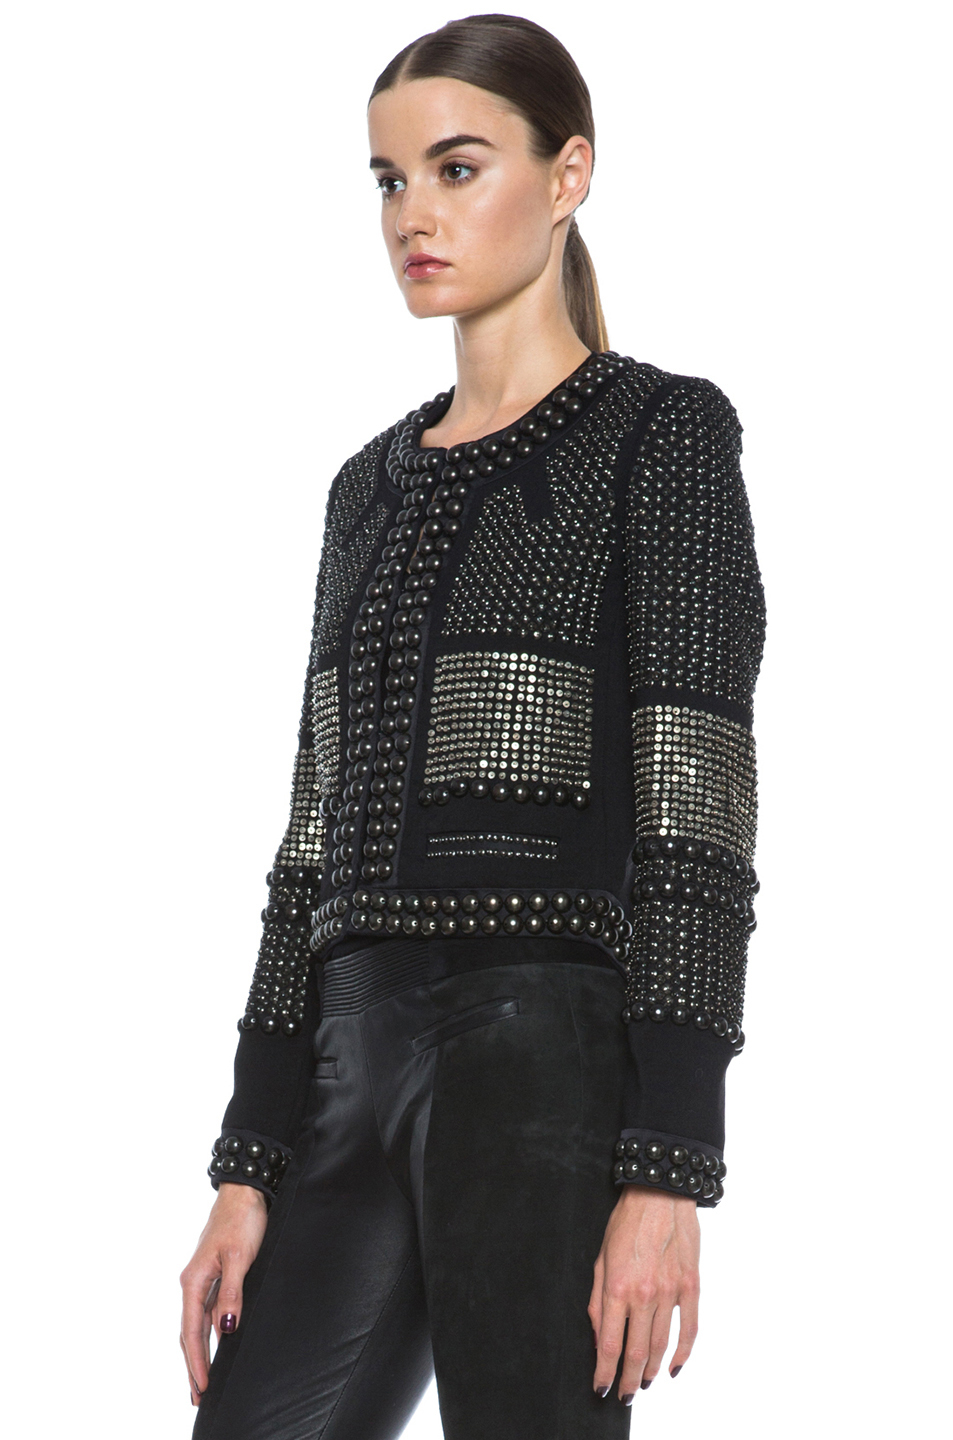 Lyst - Isabel marant Jayna Woolen and Embroidery Jacket in Black